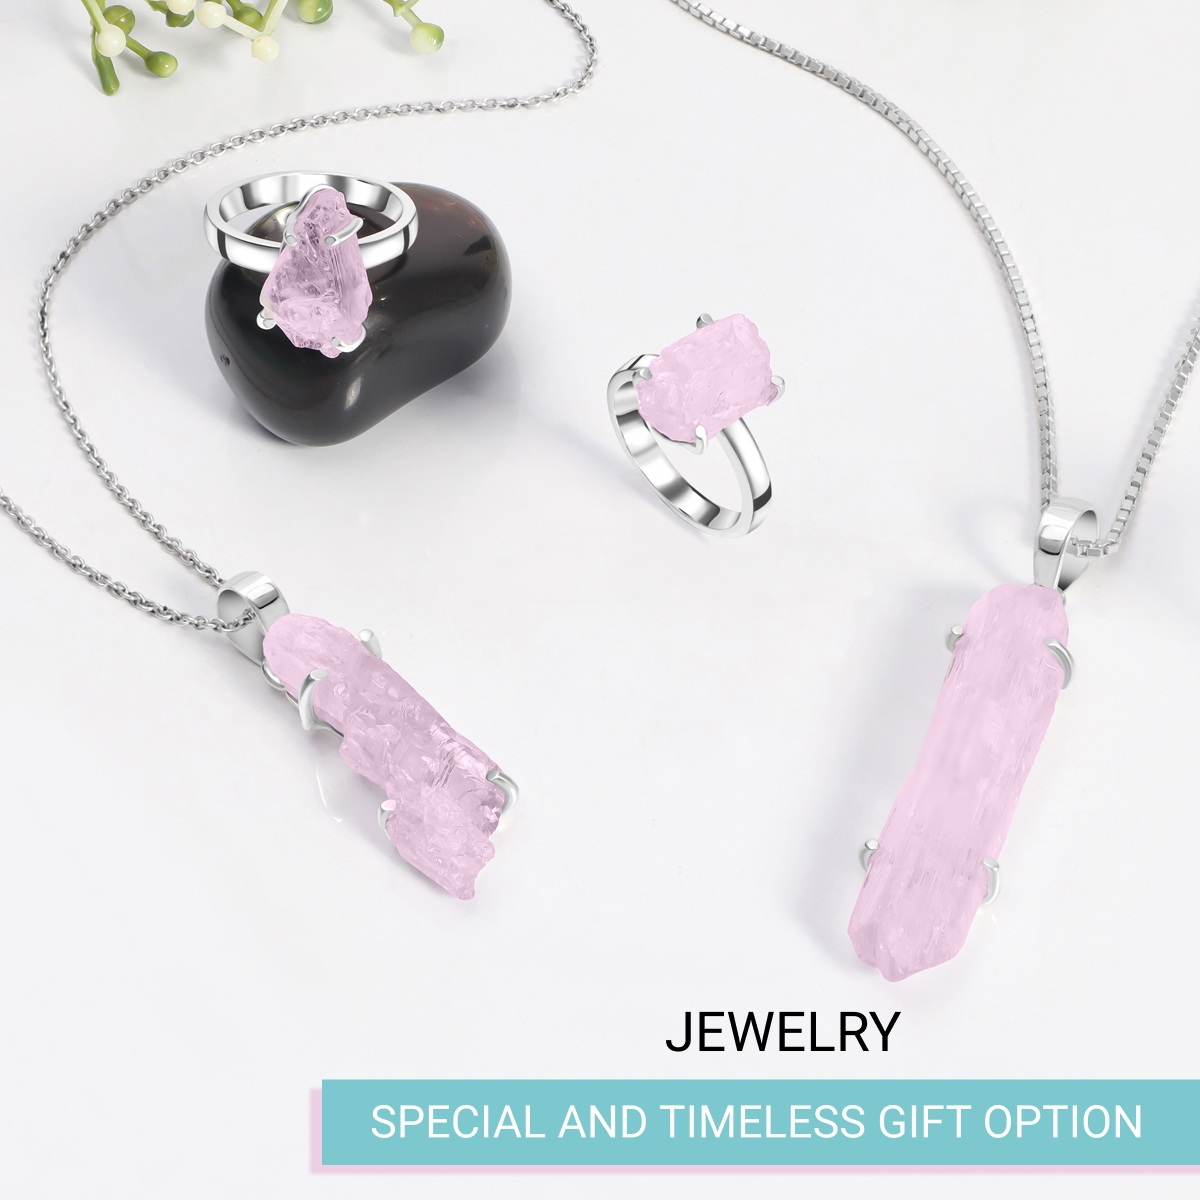 Jewelry - Special And Timeless Gift Option